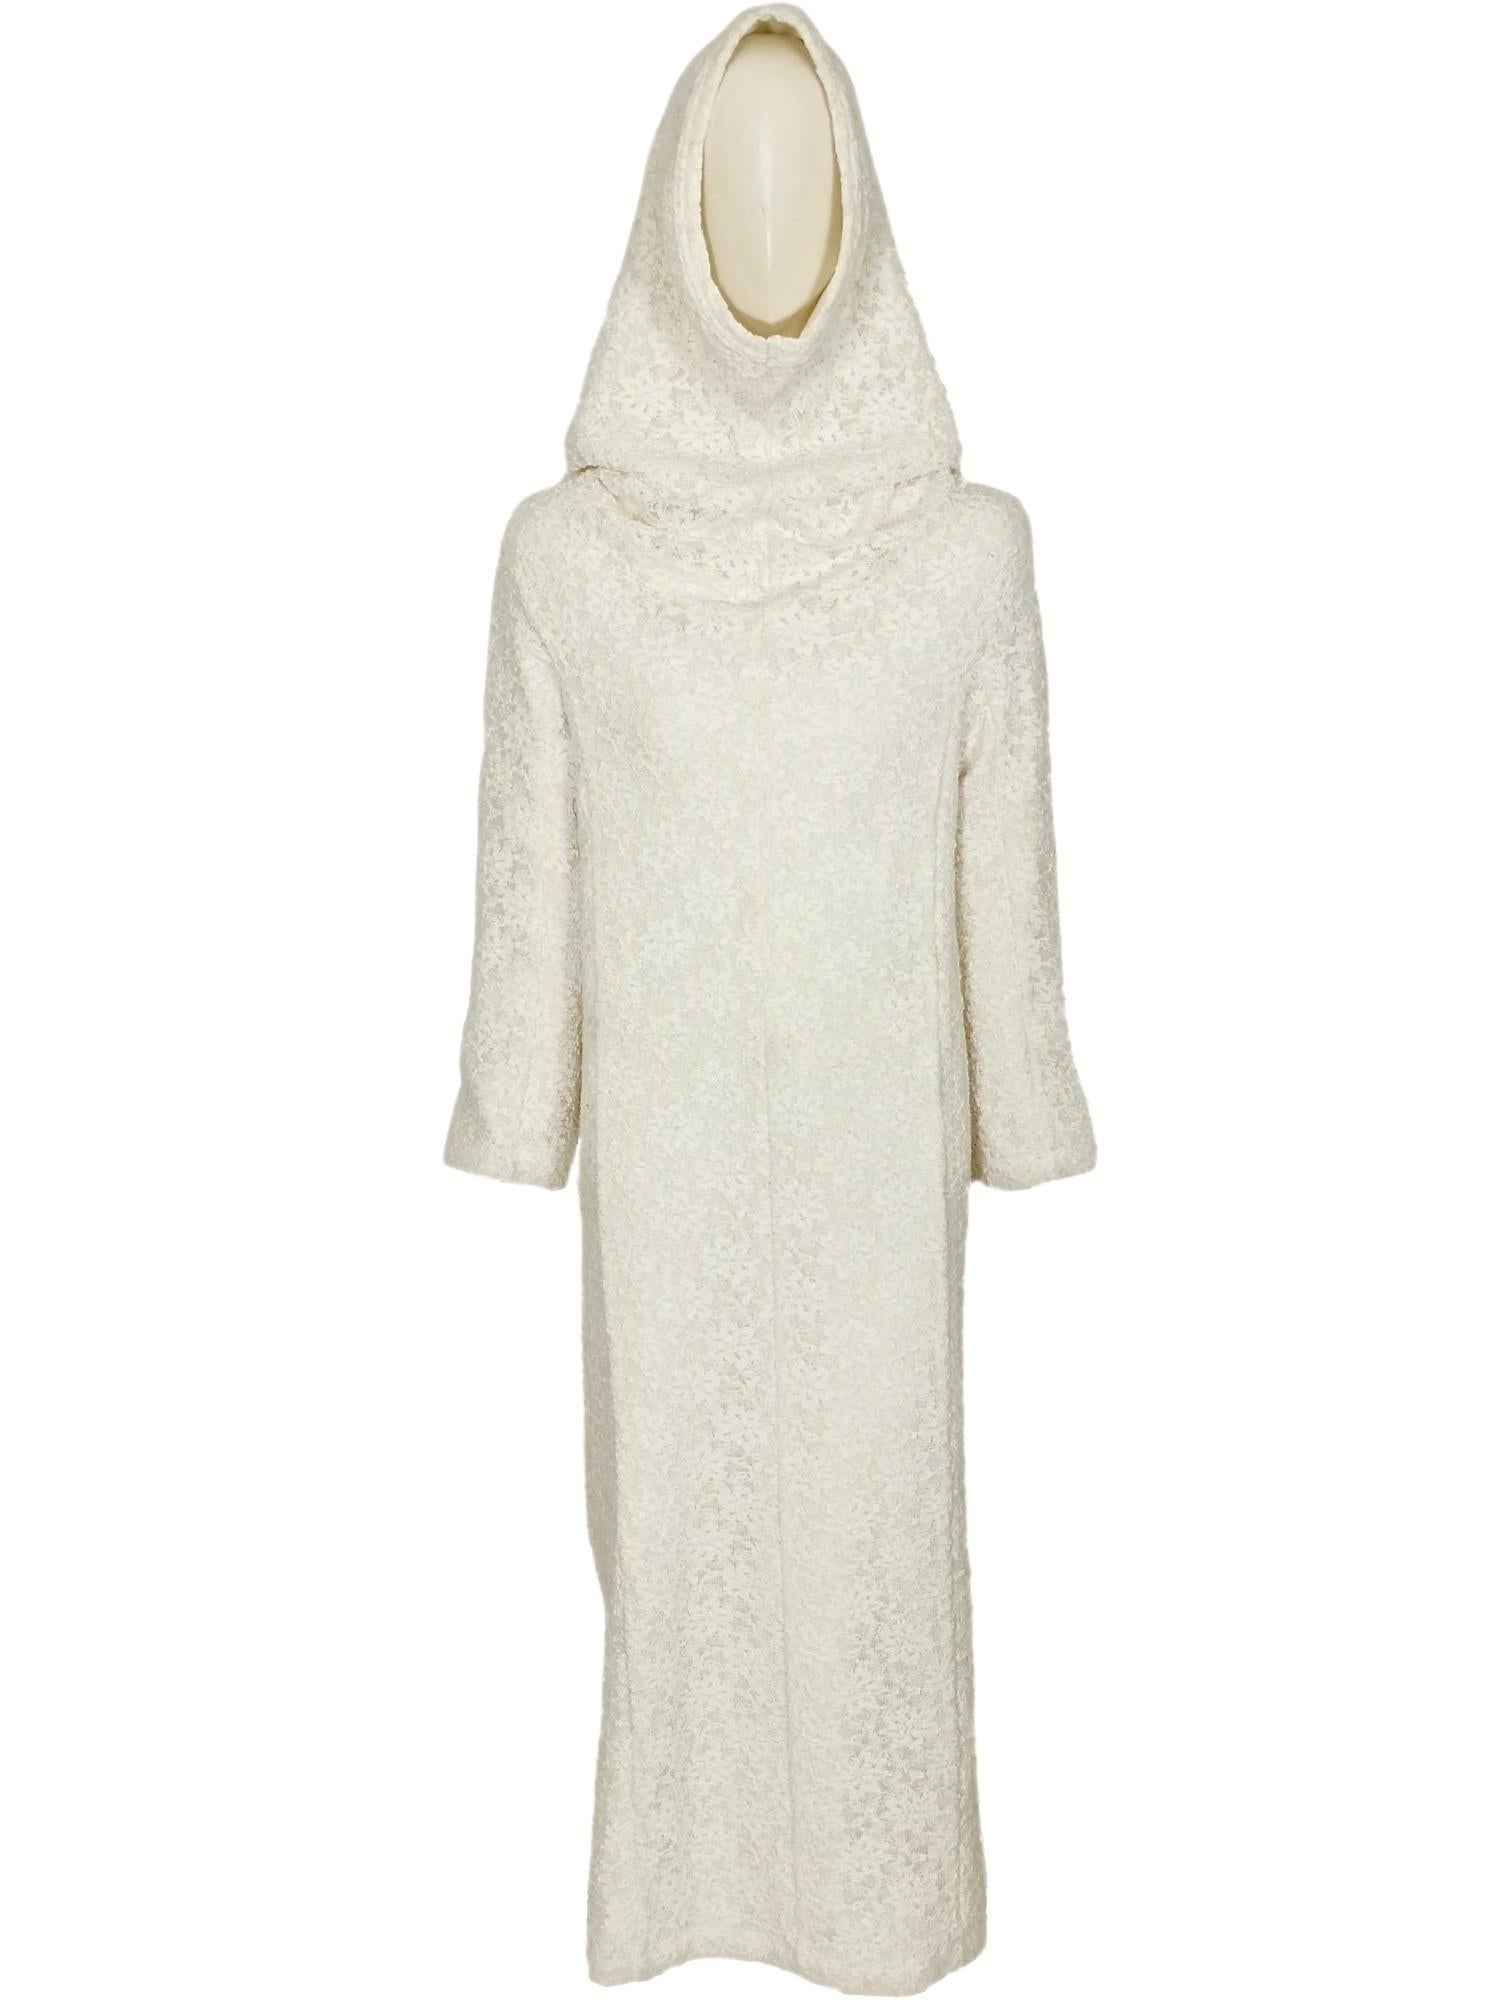 Comme Des Garcons White Drama Cowl Hooded Dress AD 2011 For Sale 1